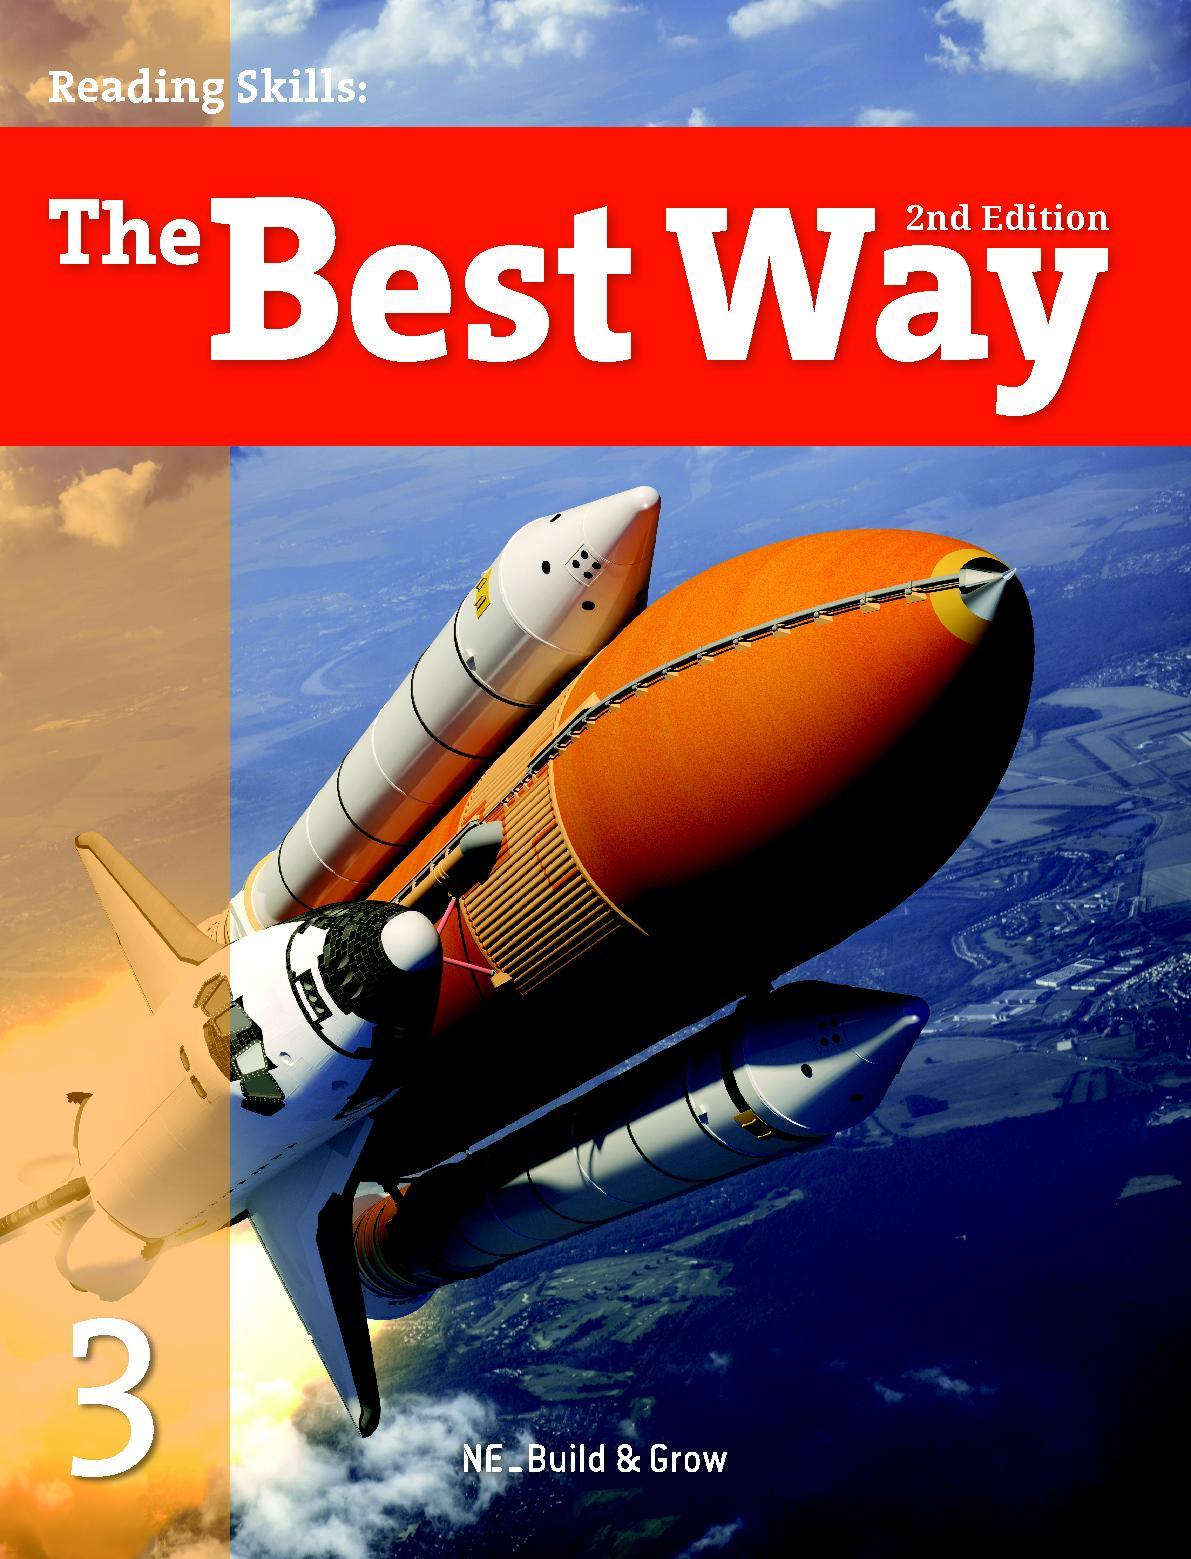 The Best Way 3 (2nd Edition) [CD1 개 포함]